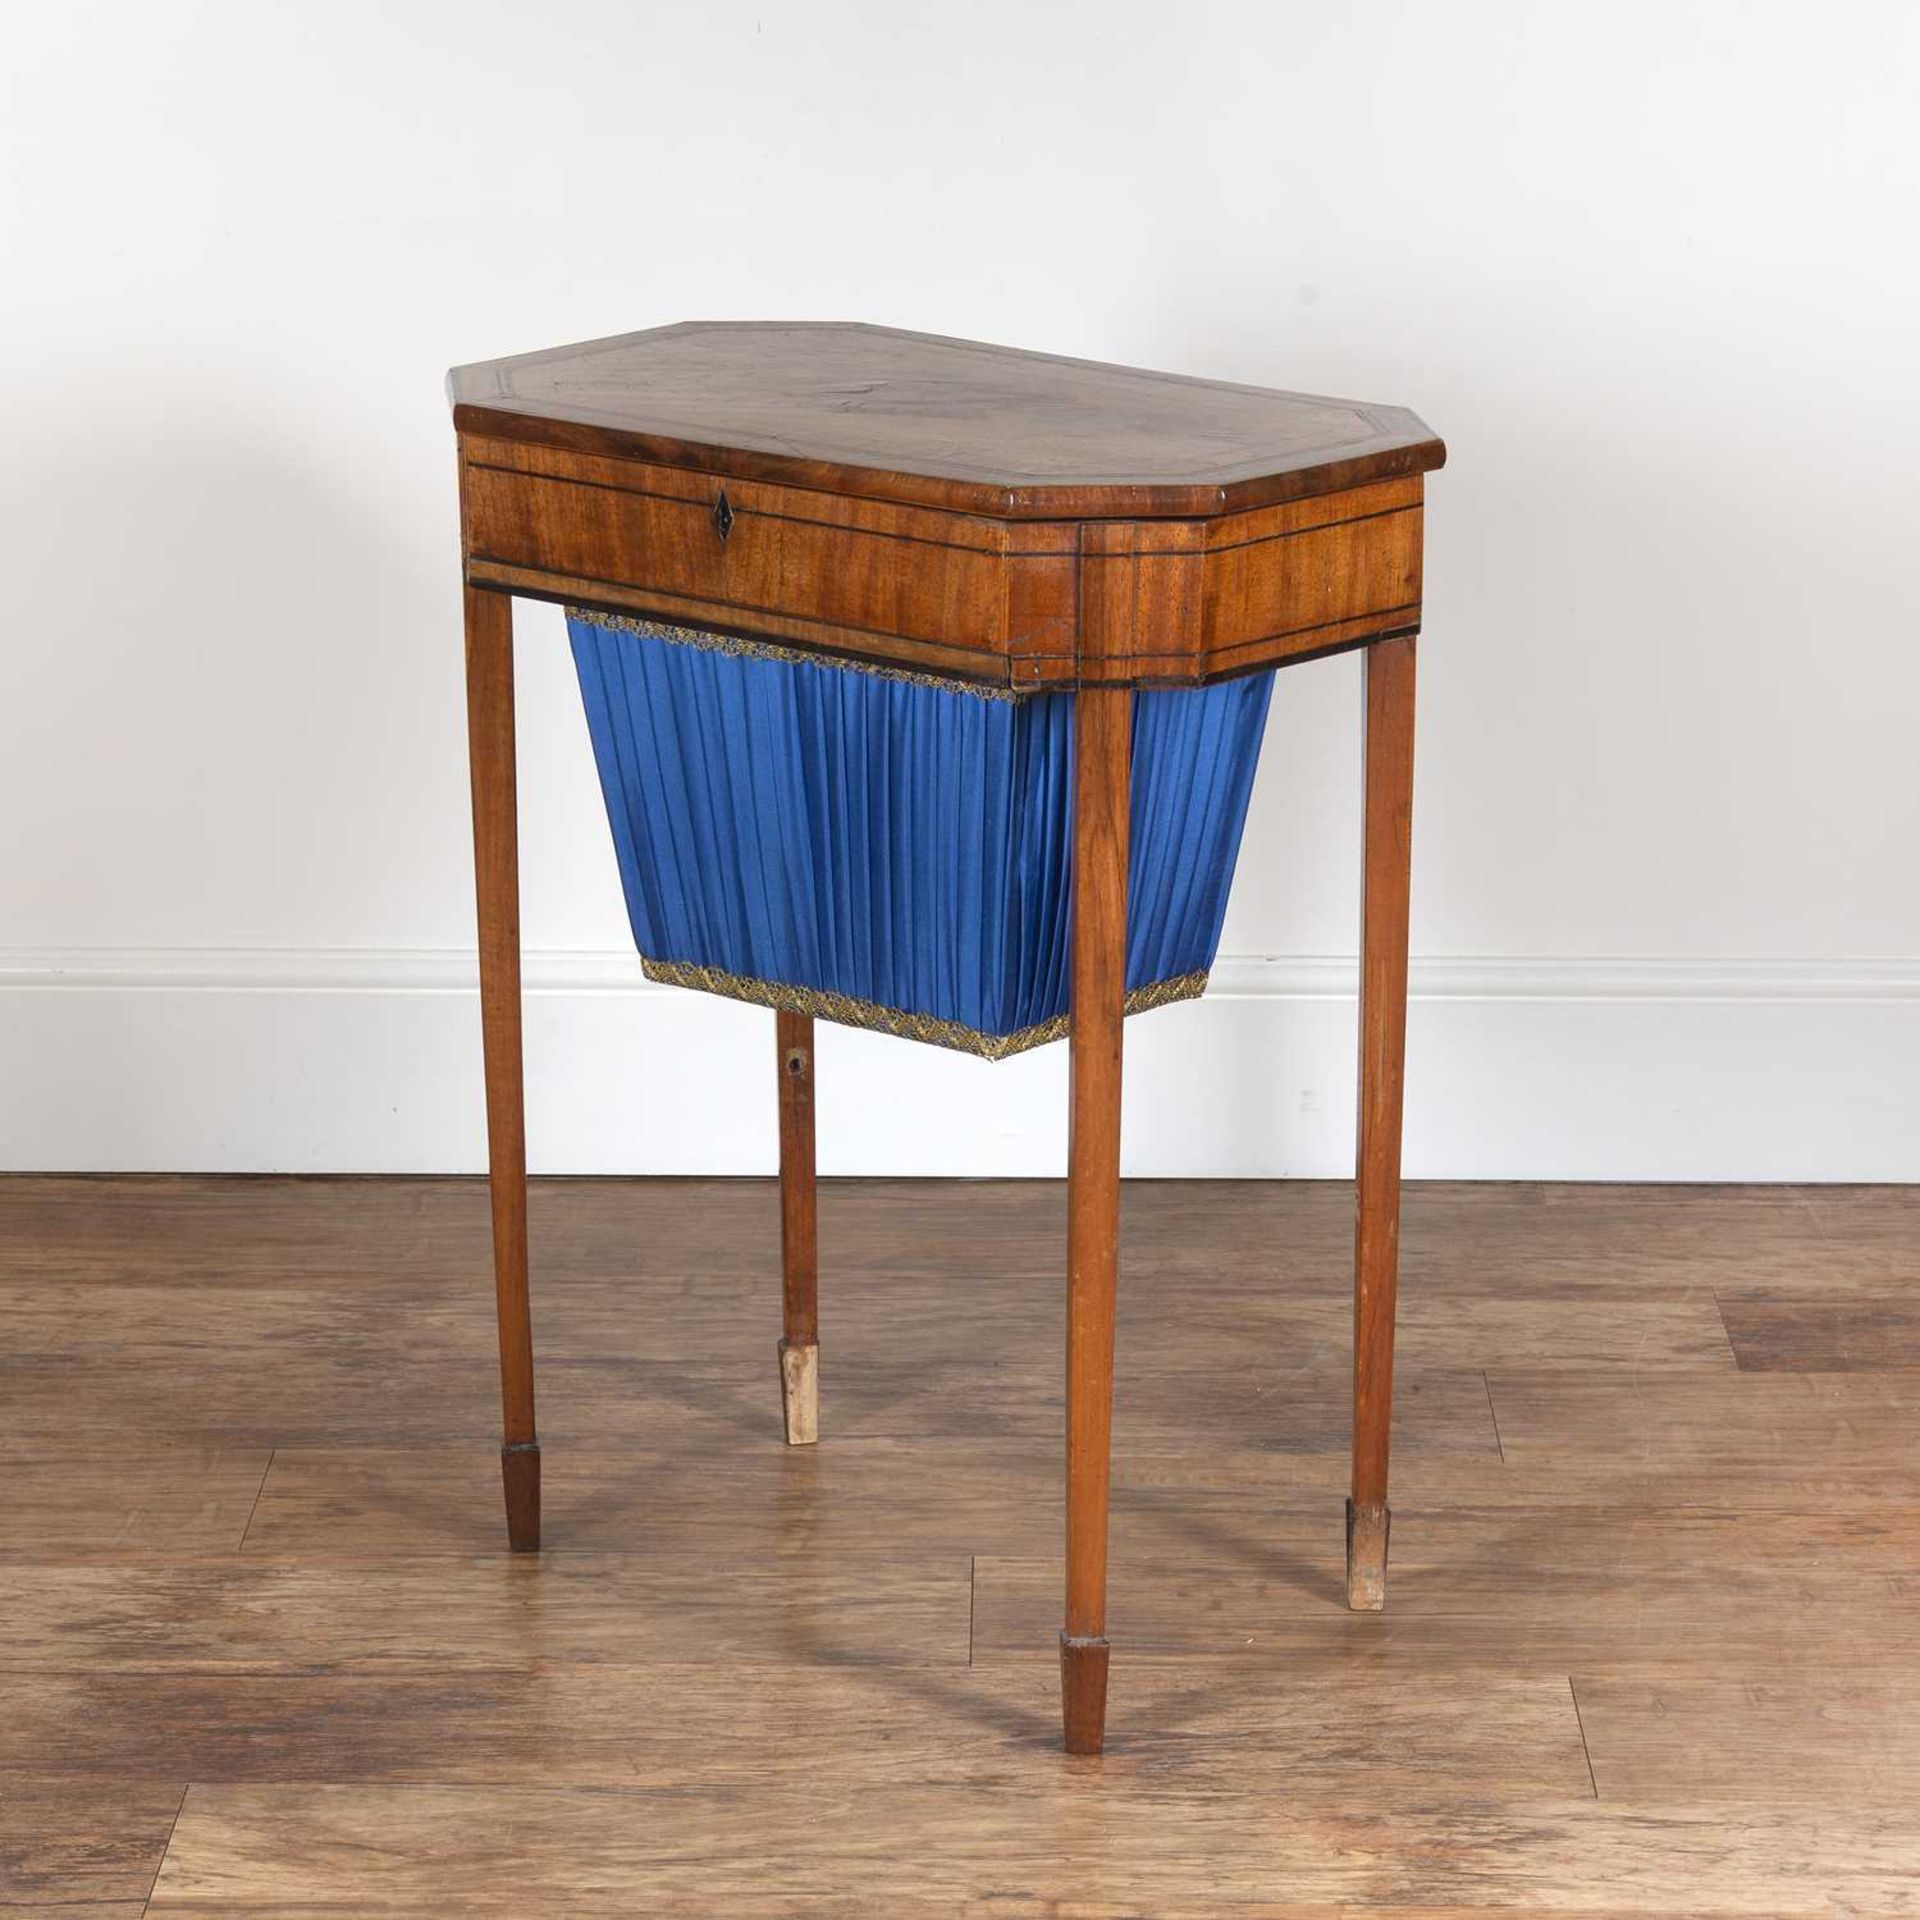 Mahogany sewing table 19th Century, a lift up lid revealing a fitted interior, above a pull-out - Image 3 of 7